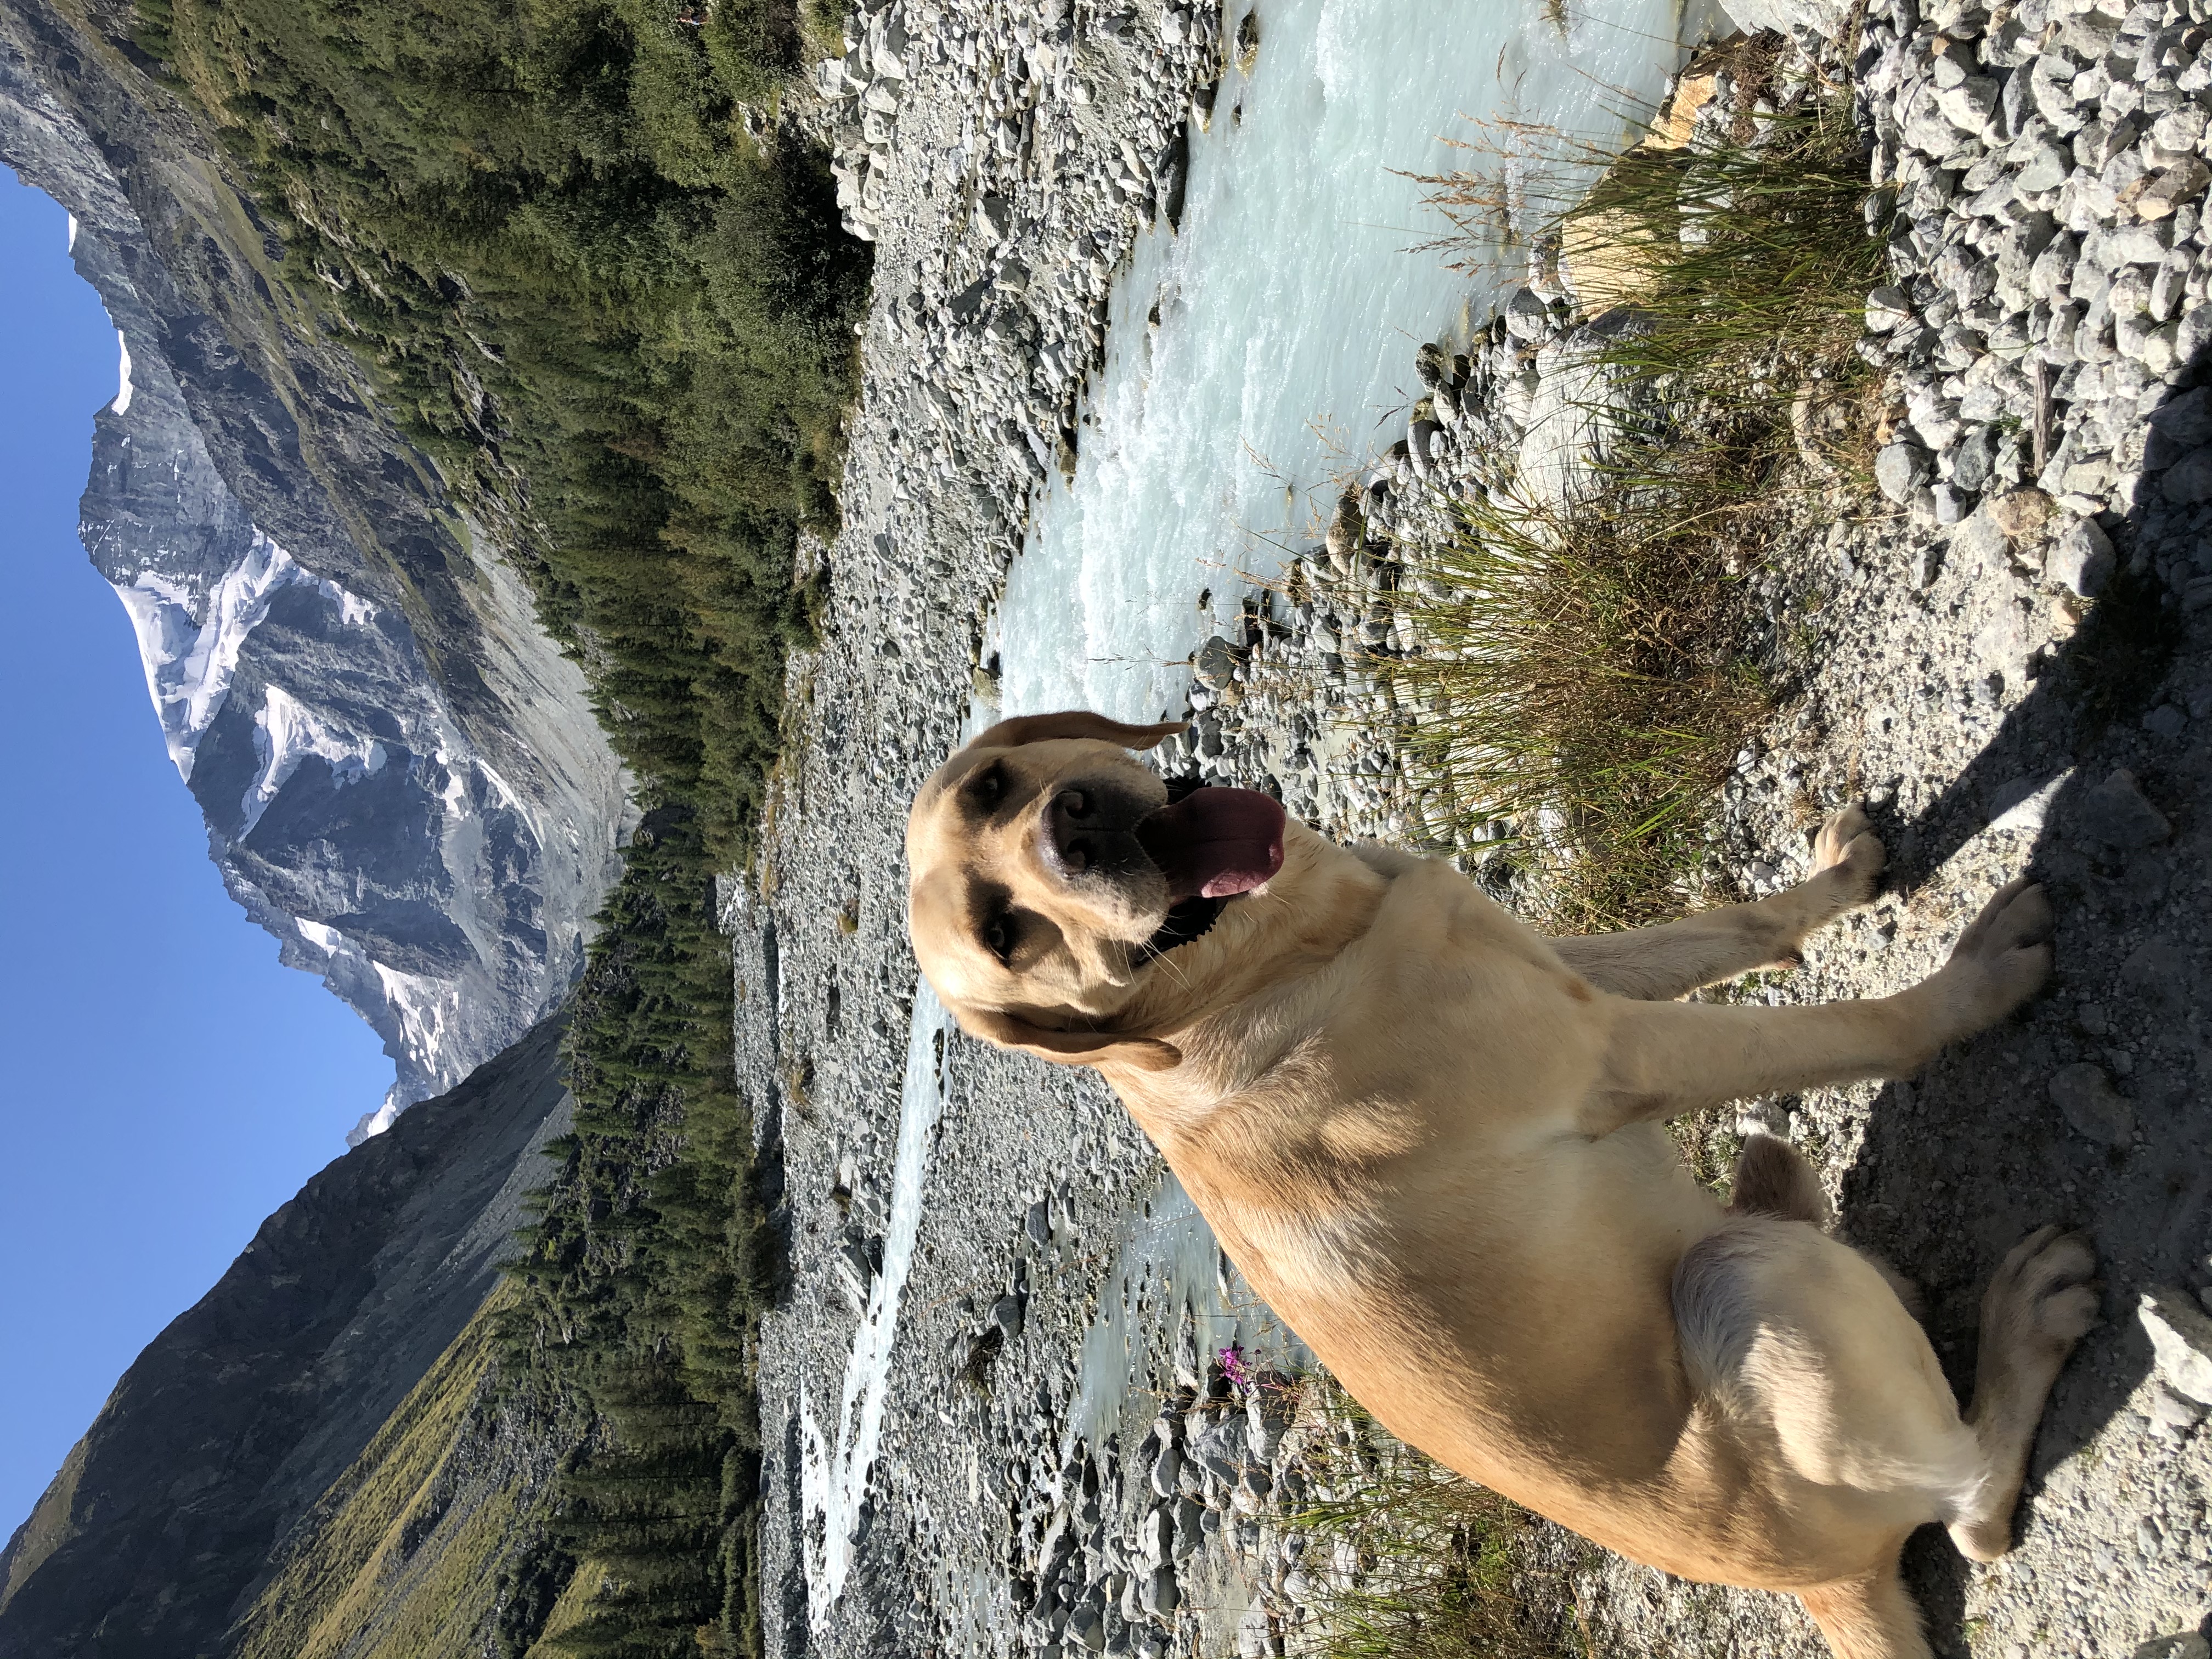 A yellow Labrador retriever sitting next to a small stream with a fast-running stream of bright blue water. In the distance behind him are mountains. Photo was taken in Switzerland.